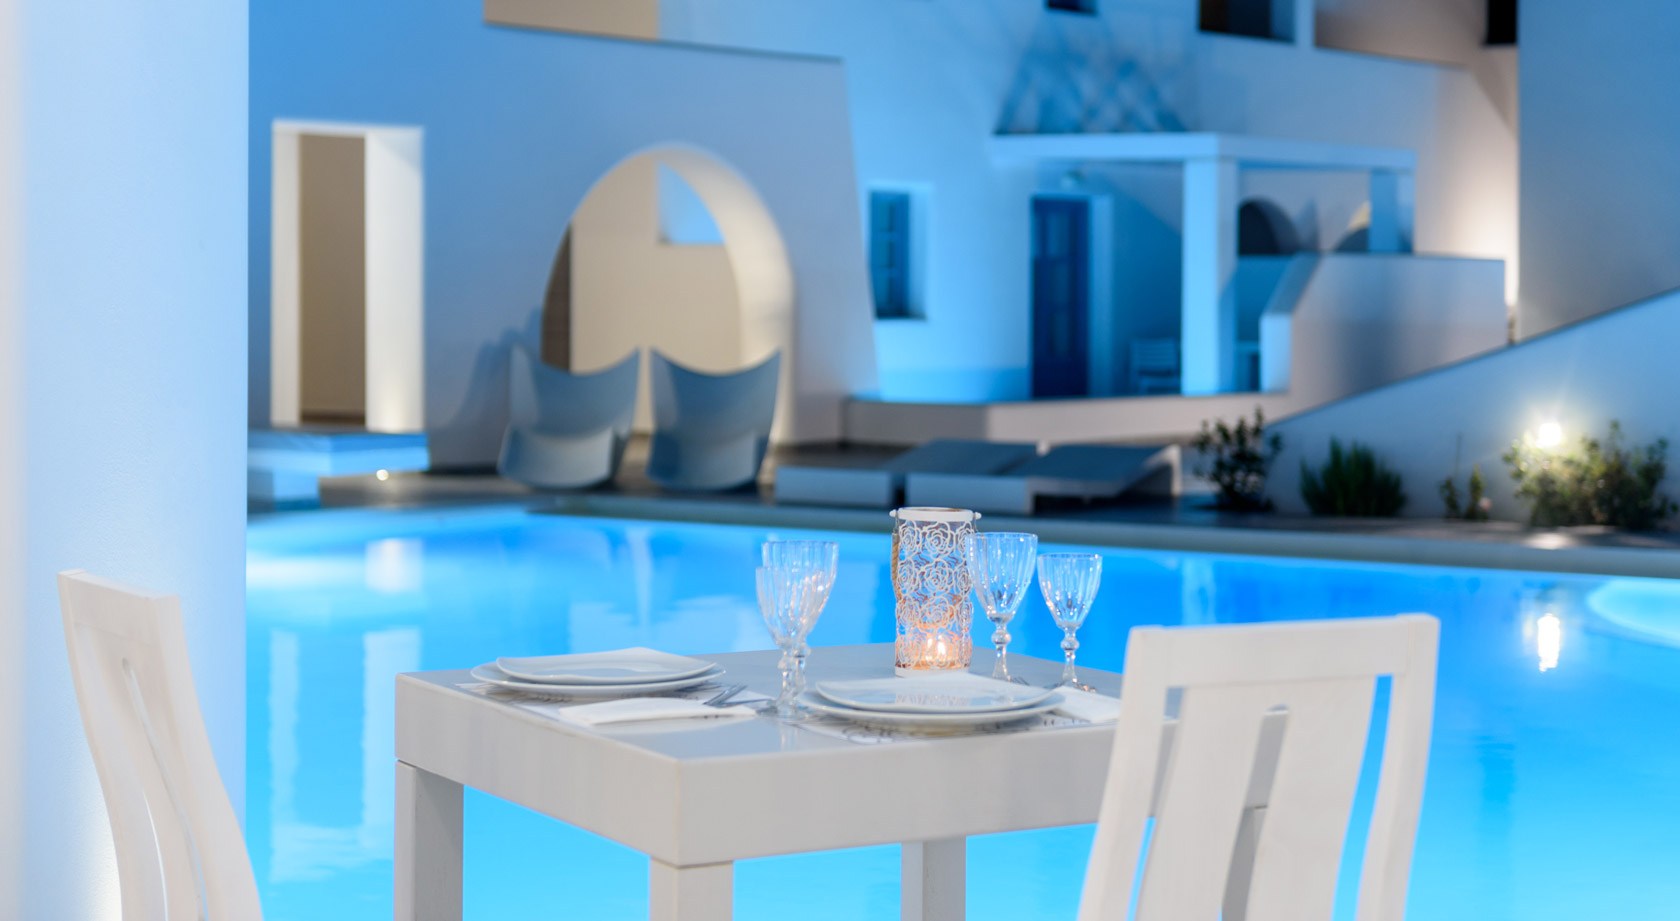 Relaxing Moments by the Pool at Antoperla, one of the ideal Santorini Luxury Resorts